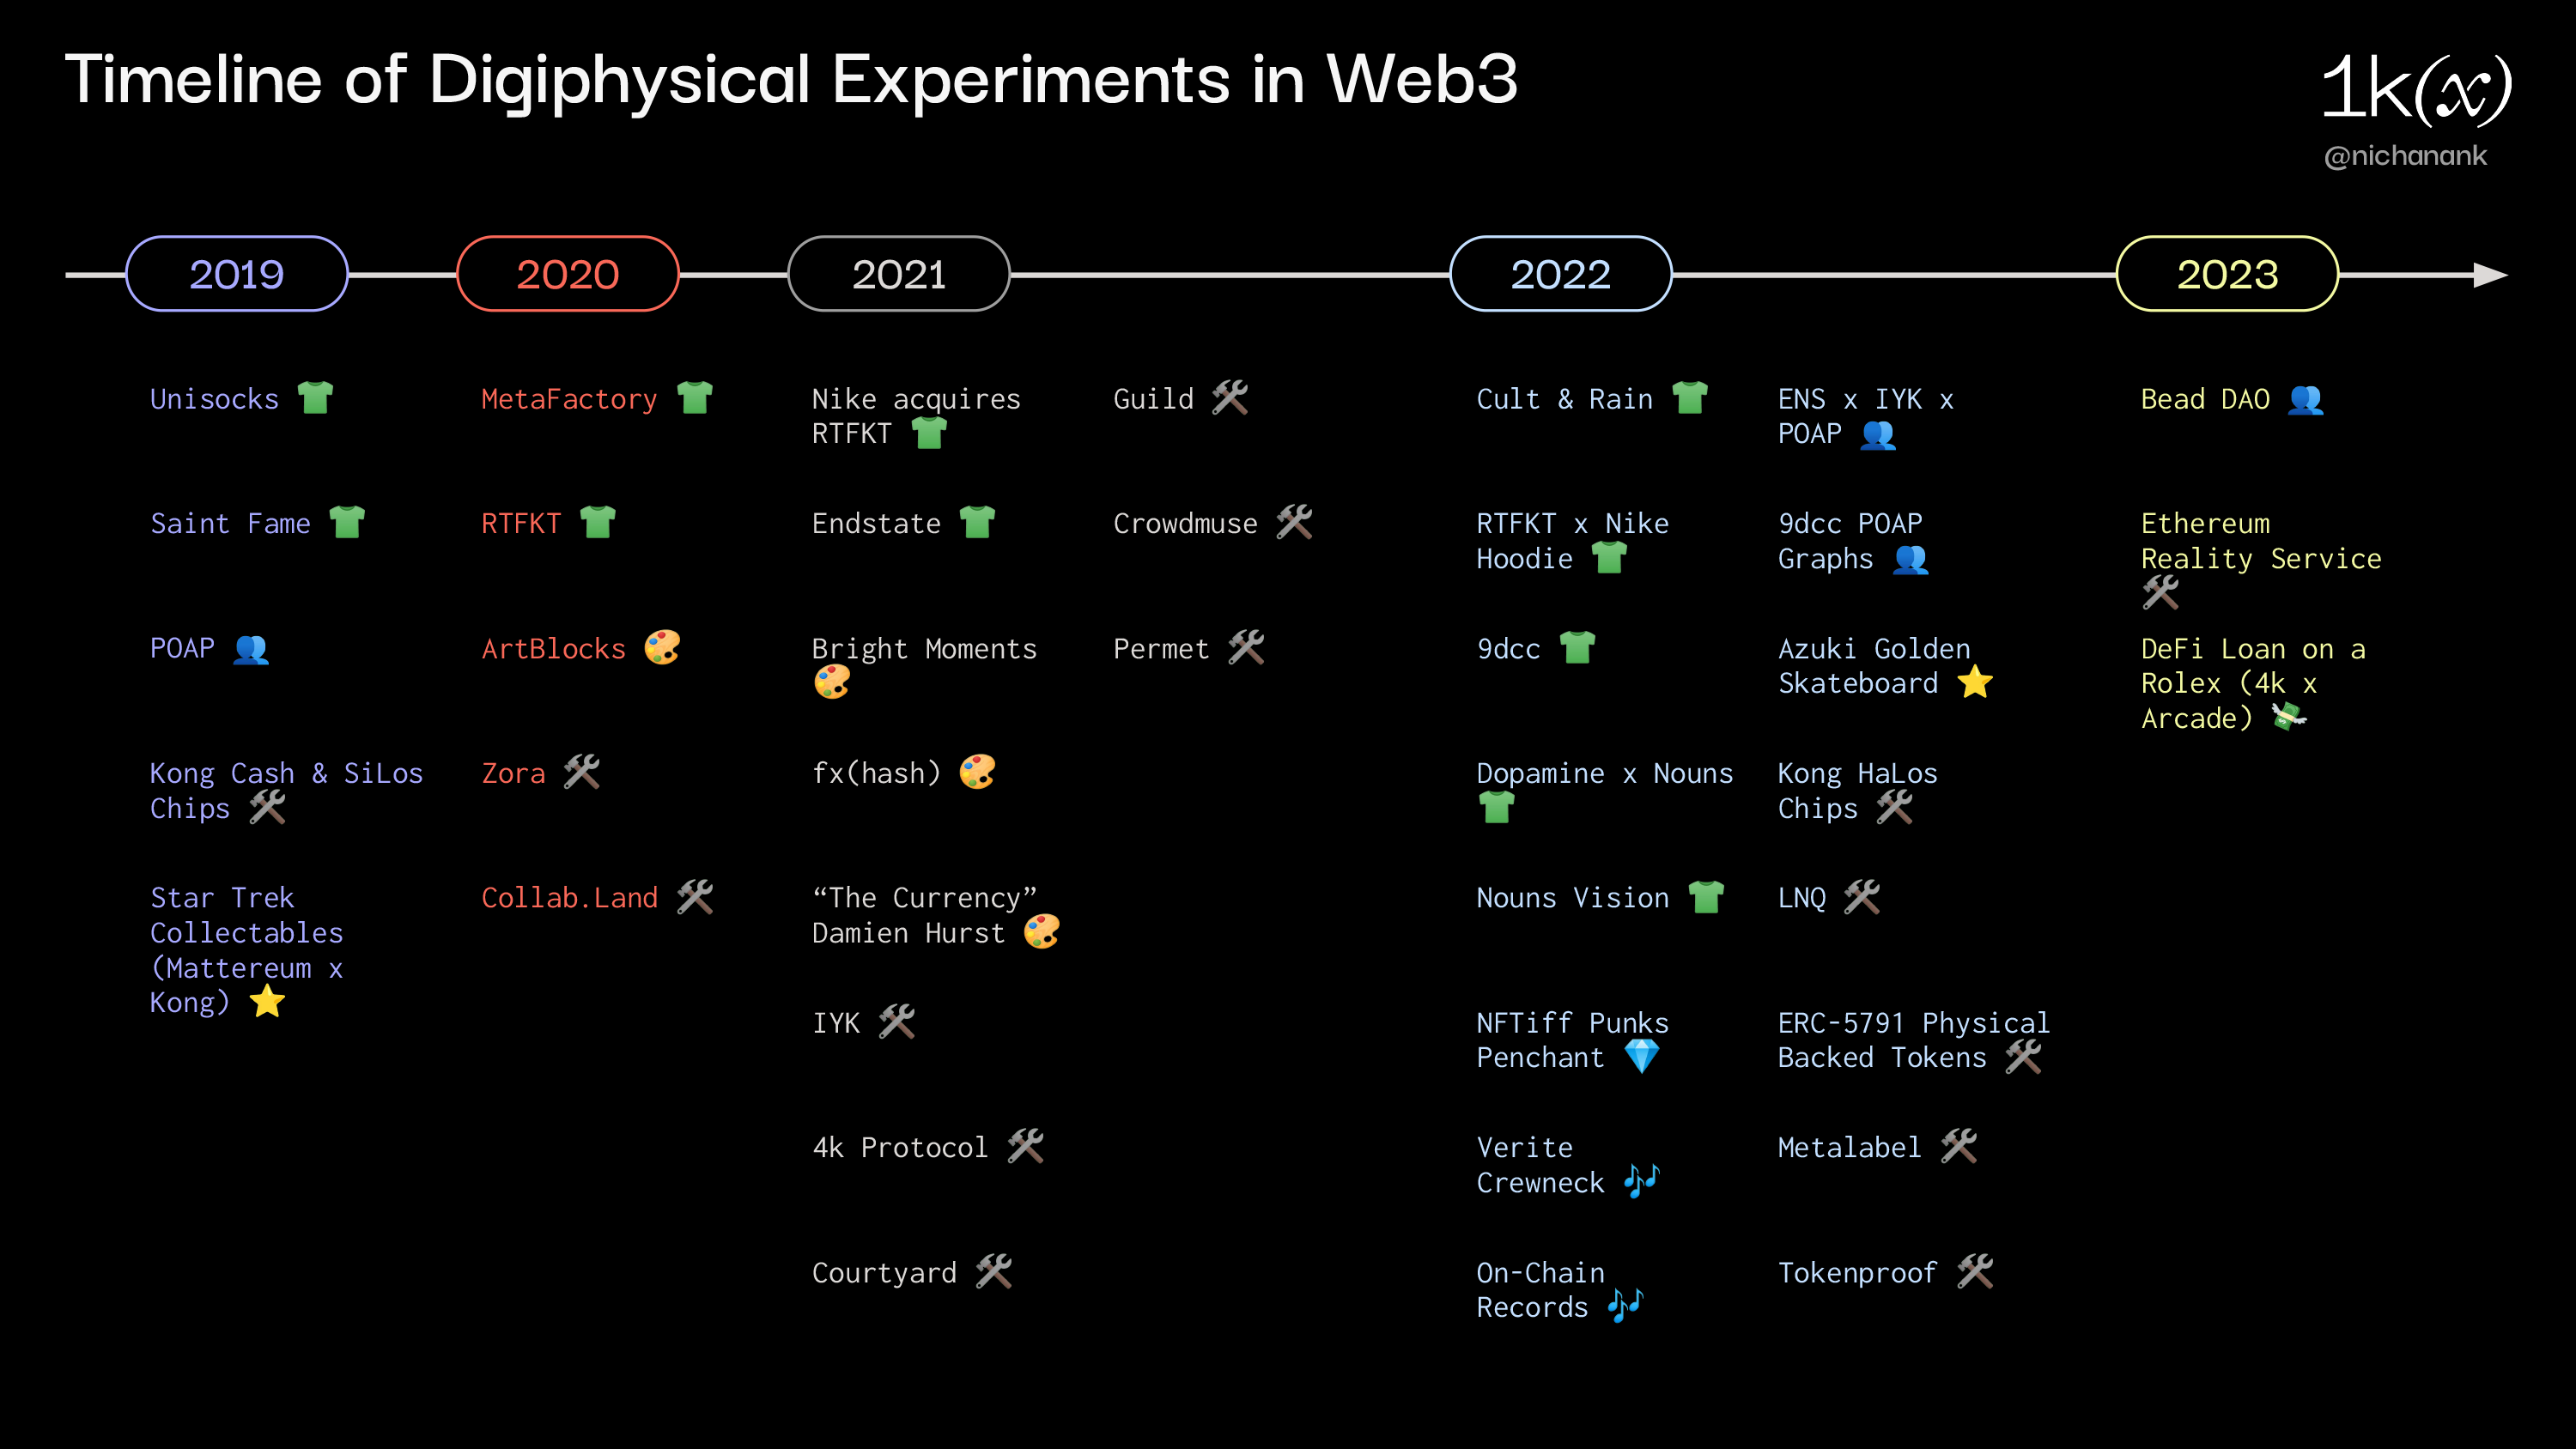 Timeline of Digiphysical Experiments & Infrastructure Emergence in Web3